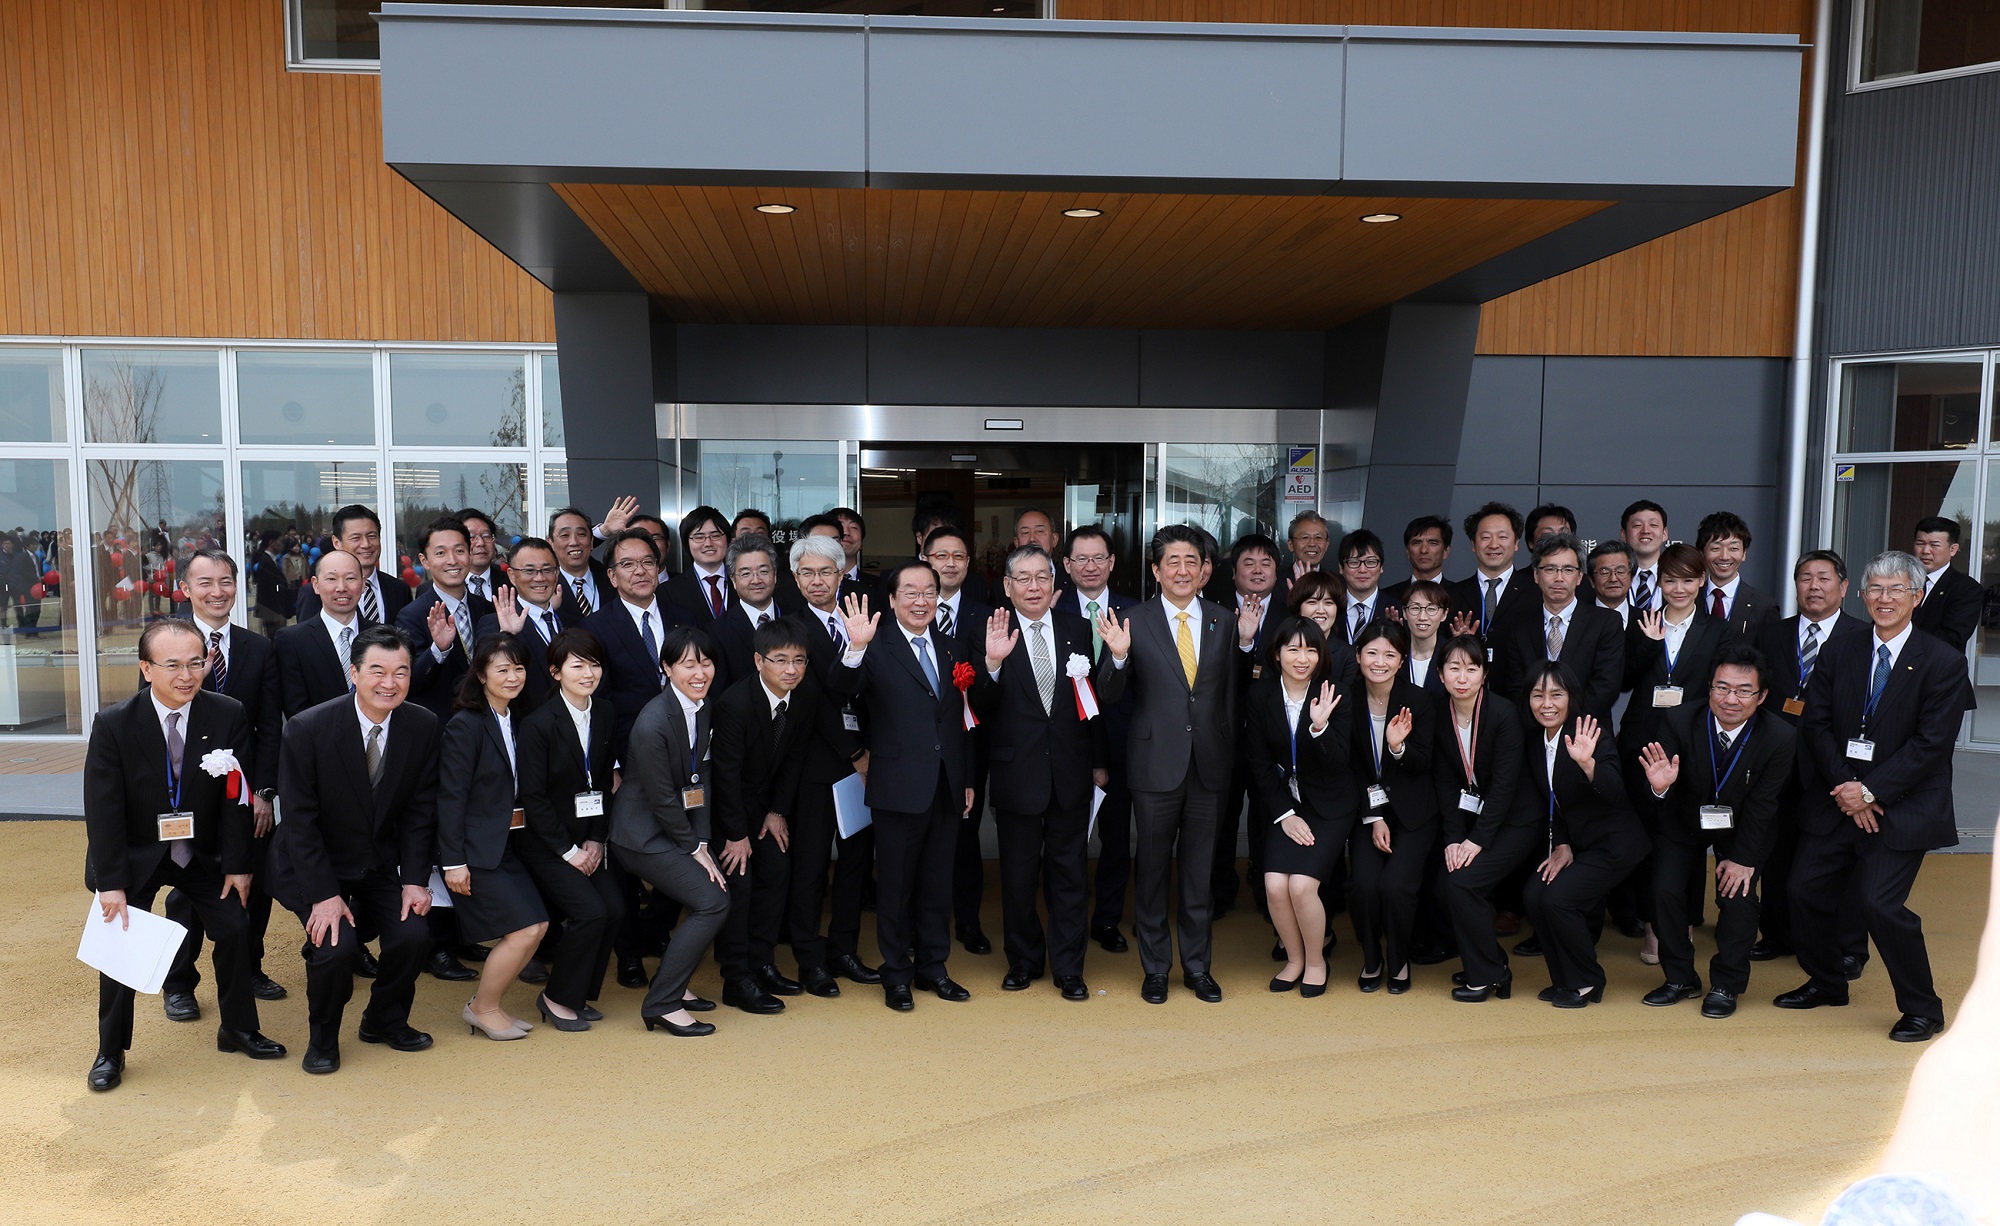 Photograph of a photo session at the new Okuma Town Hall building